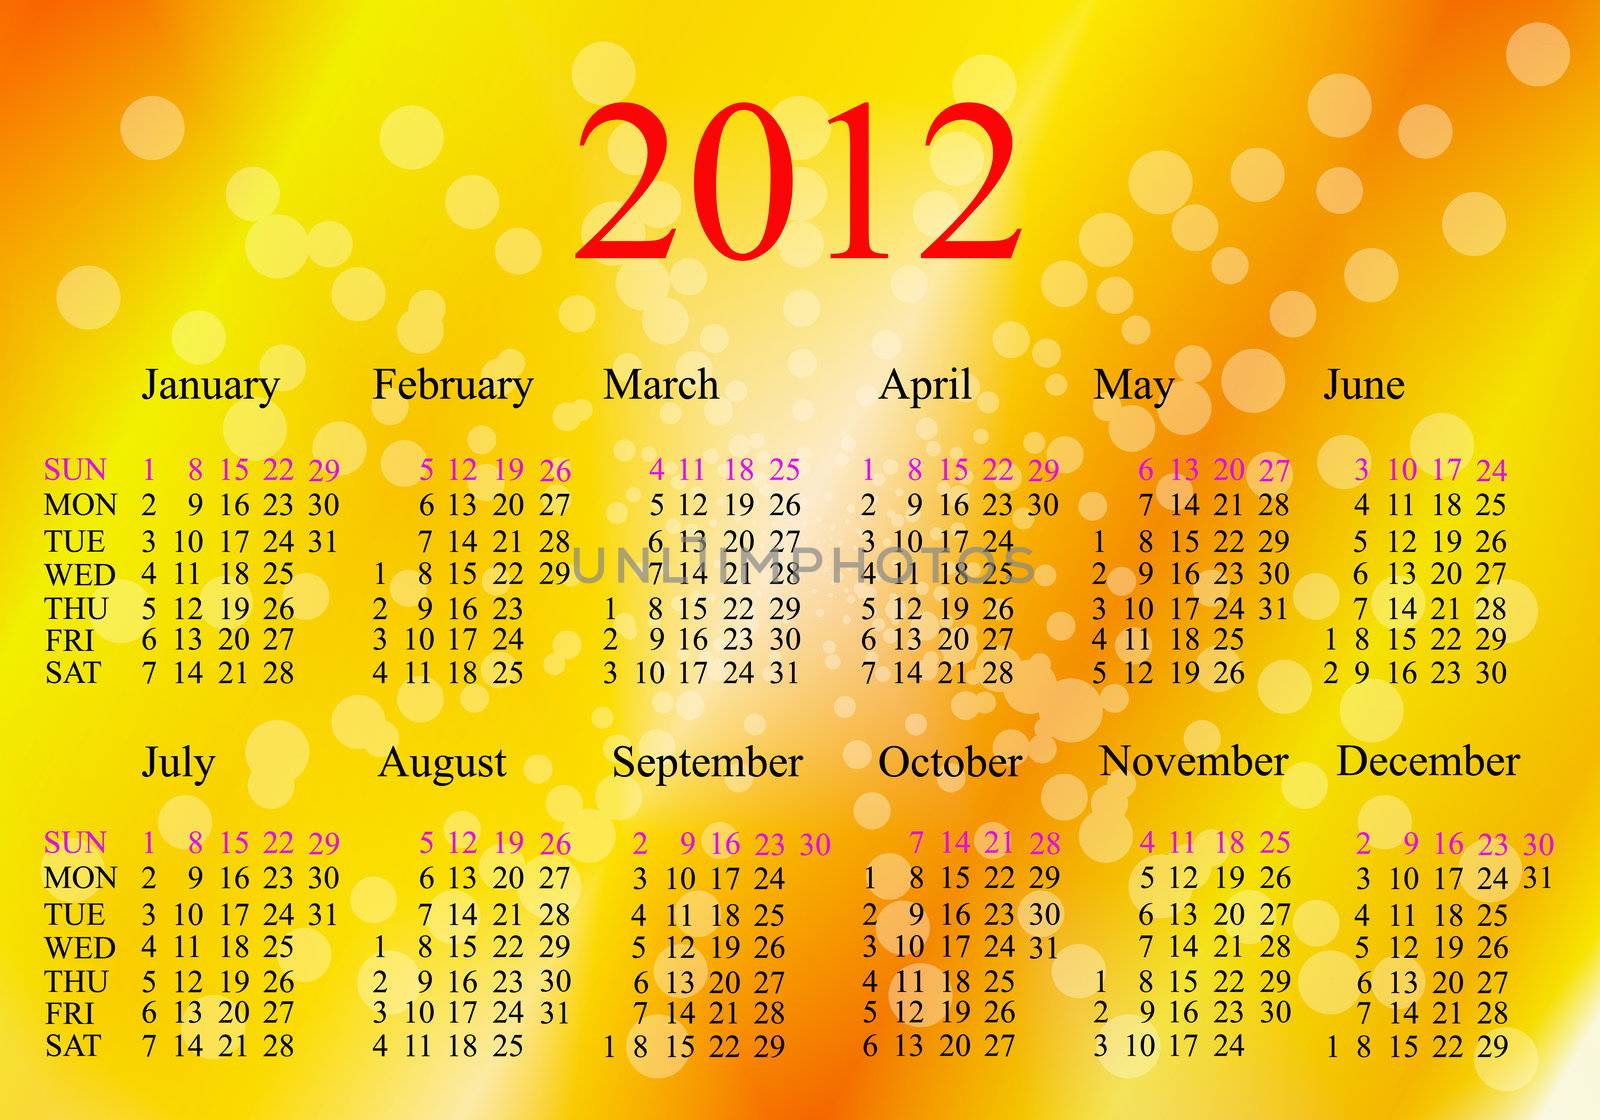 2012 Calendar.New calendar for 2012 for a bright yellow abstract background